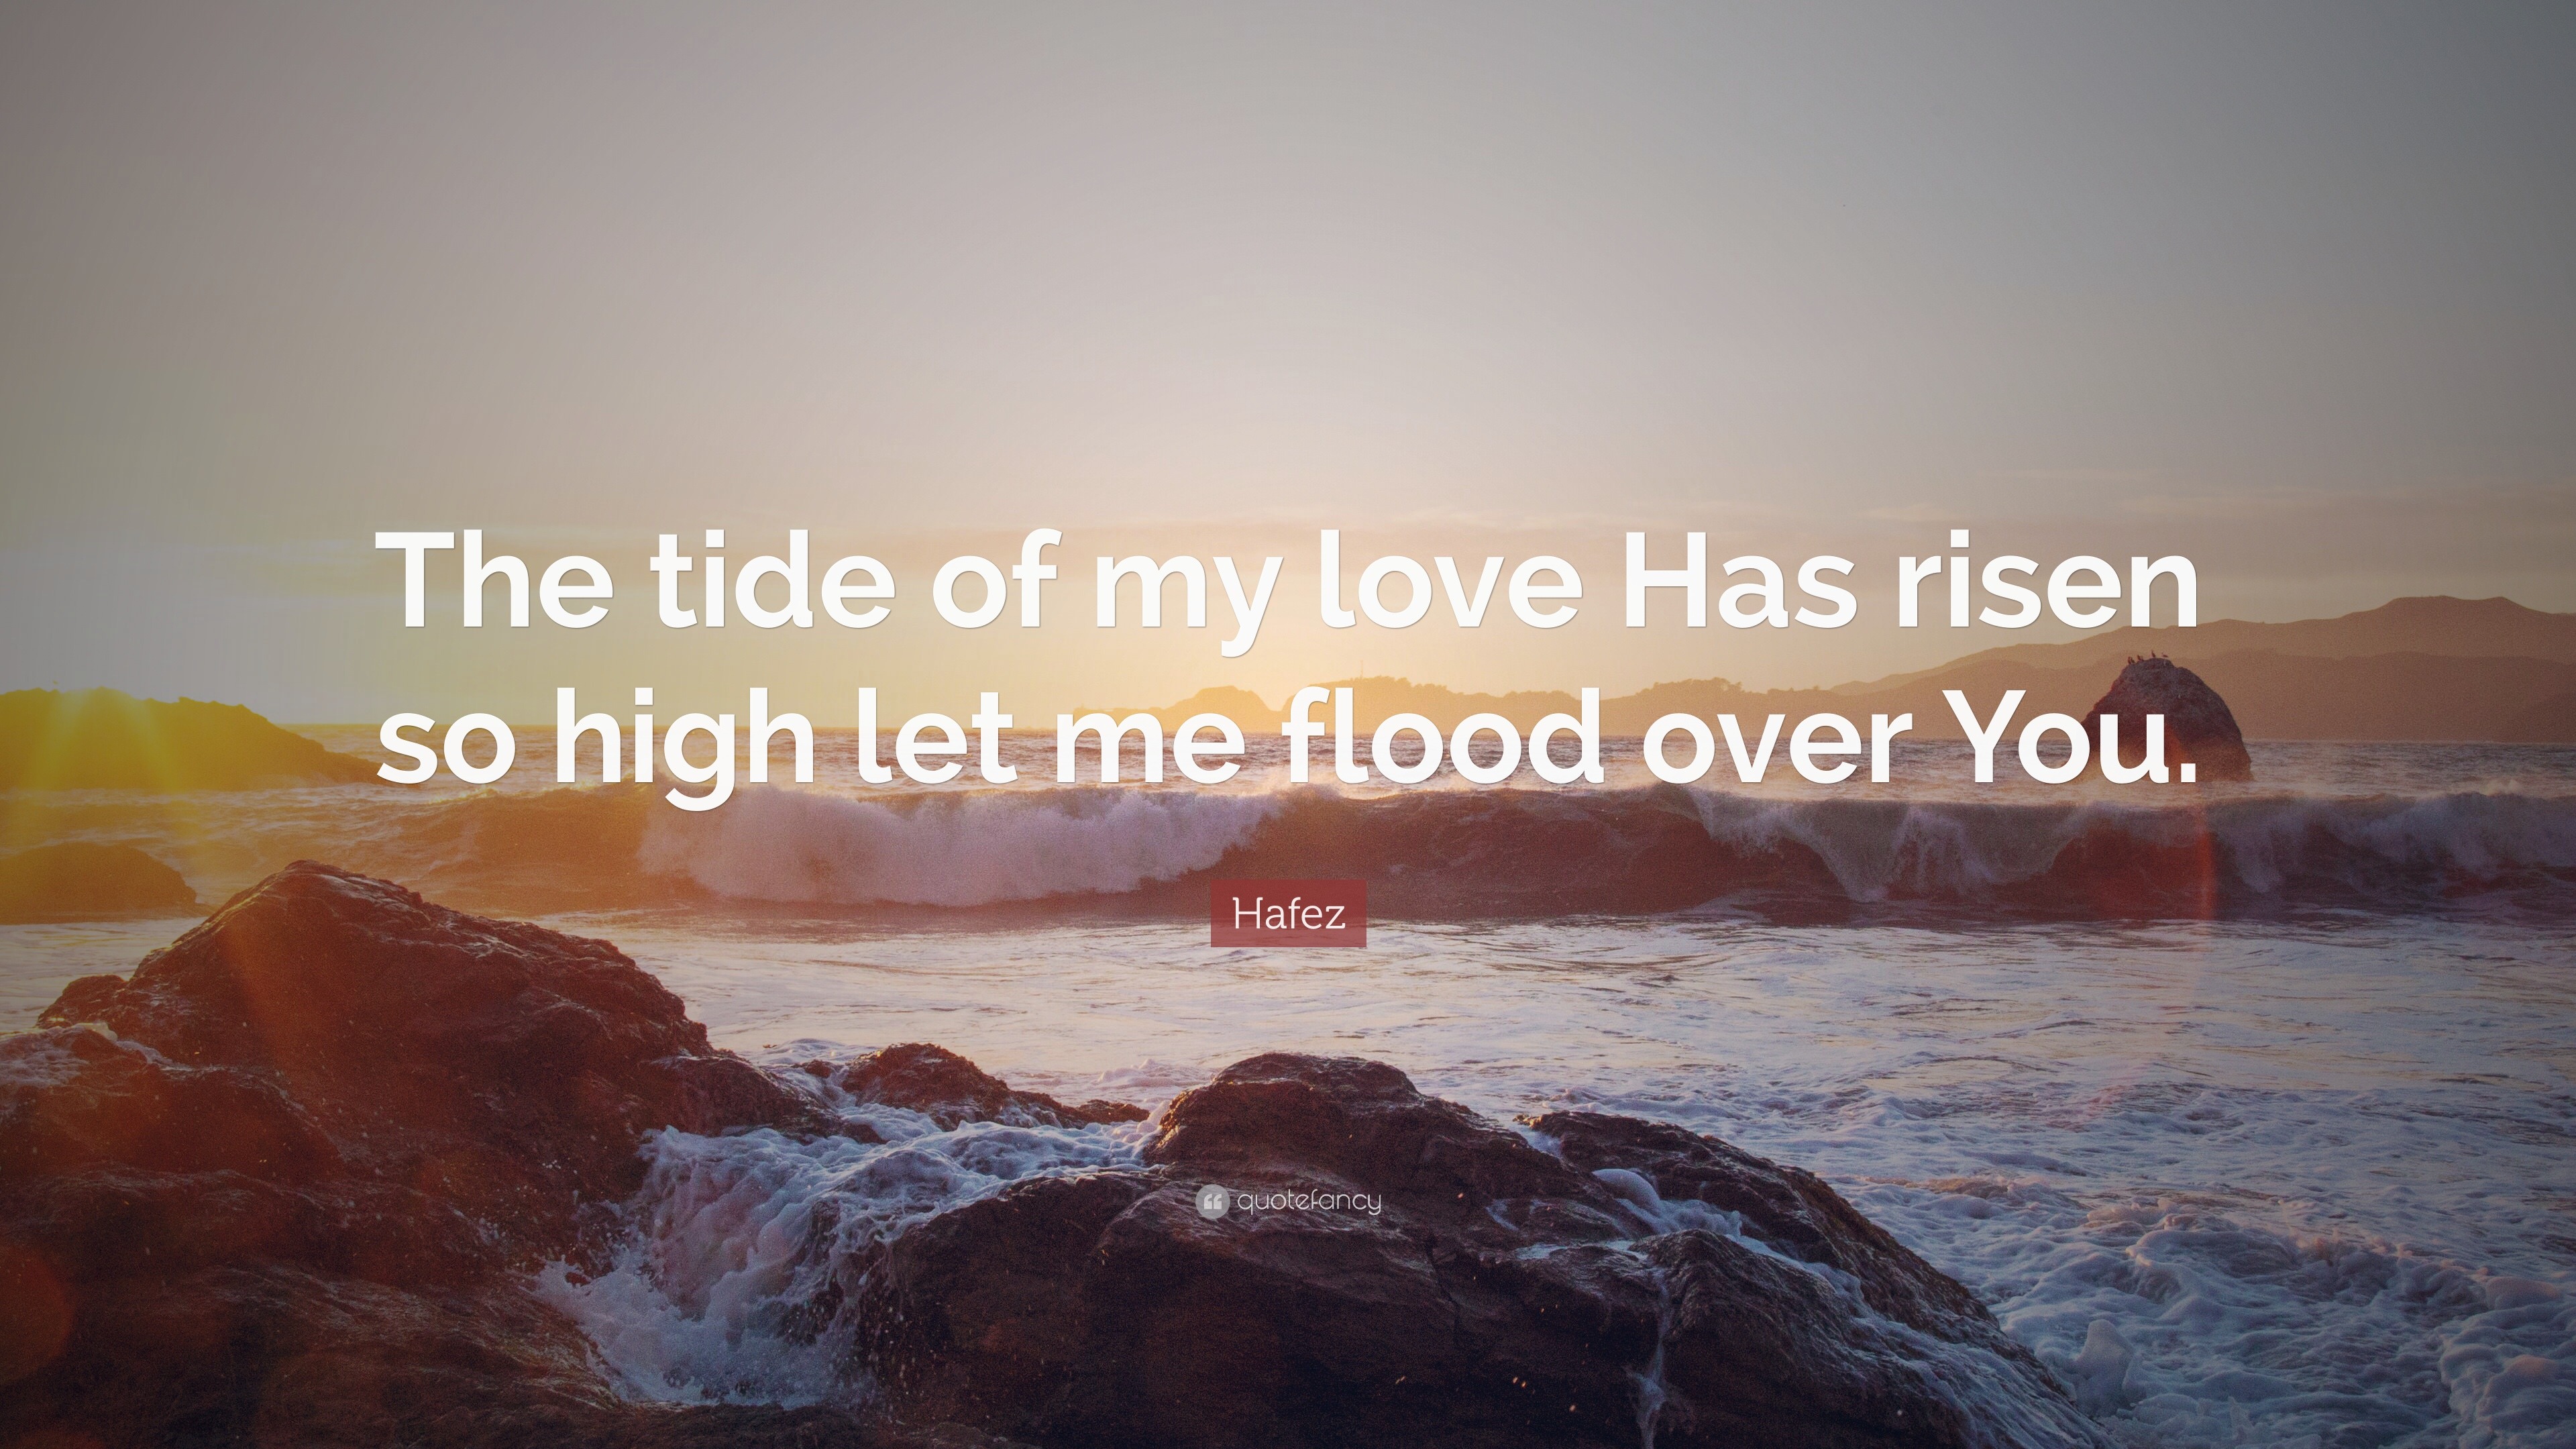 Your love is high like the tide and pull me in